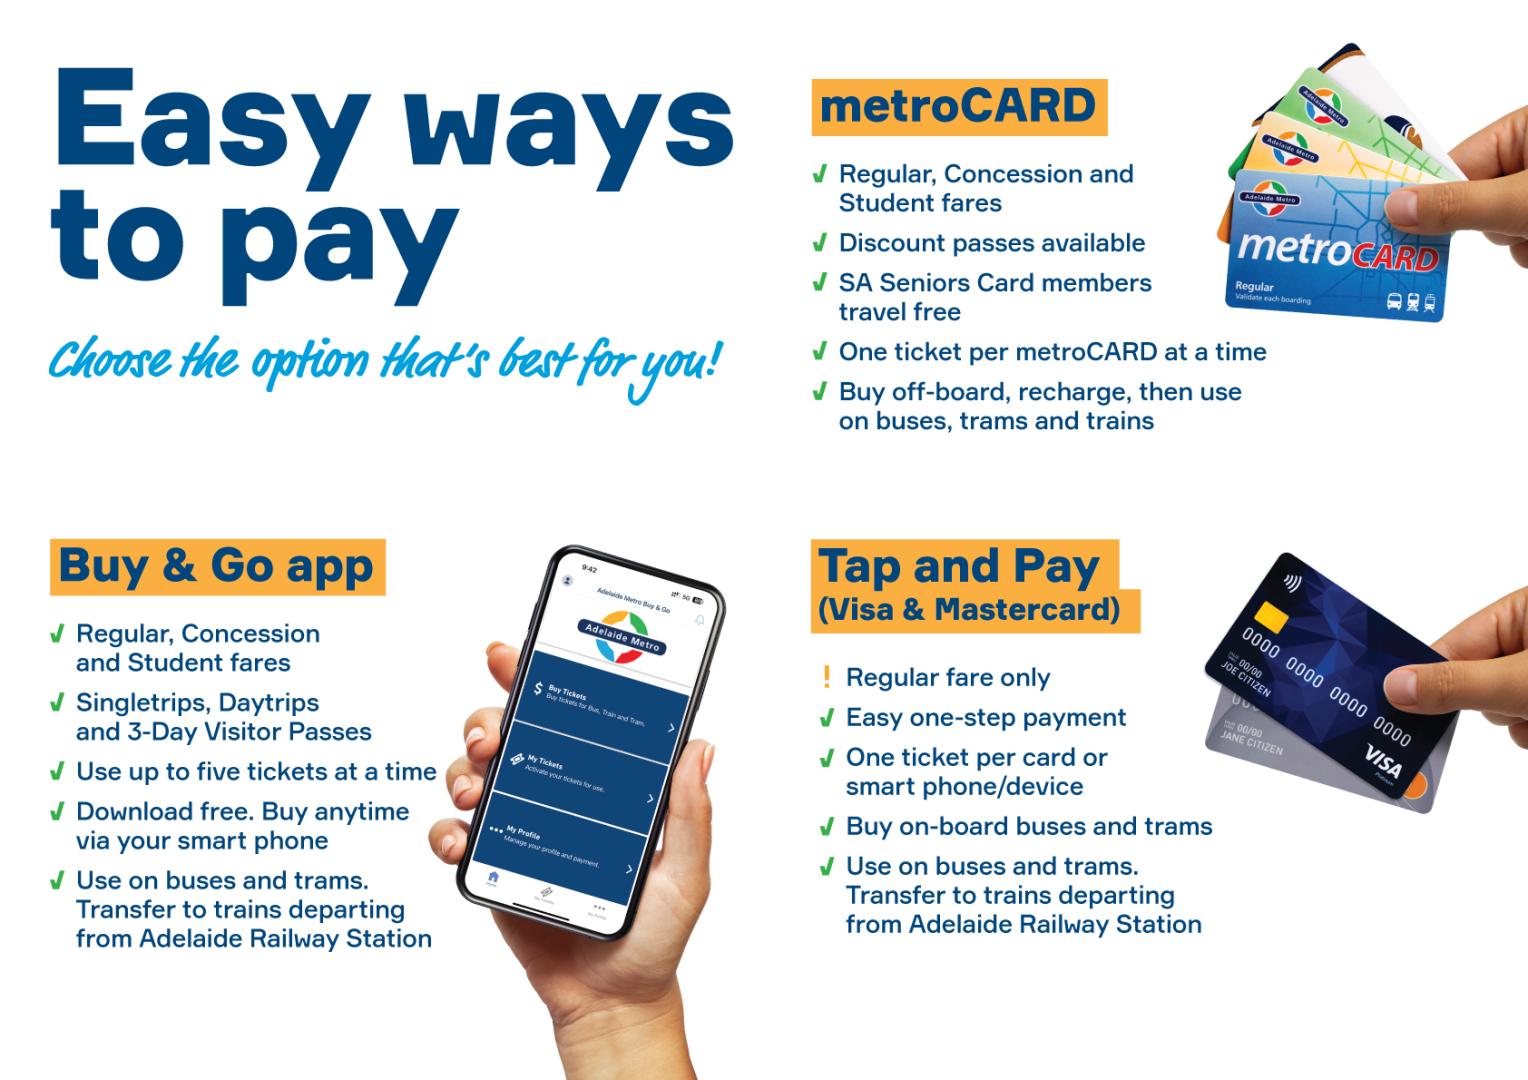 Easy ways to pay info graphic